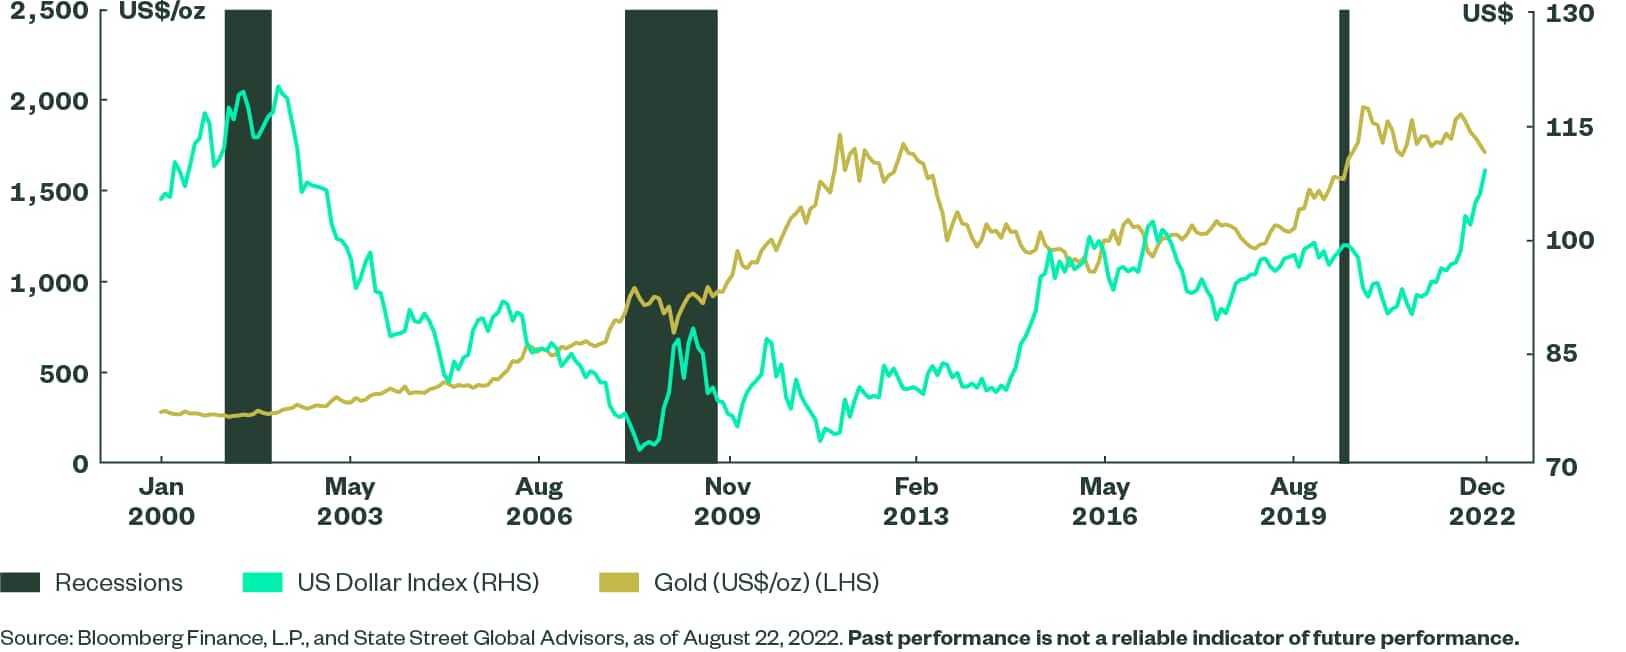 US Dollar and Gold Cement Roles During Recessions